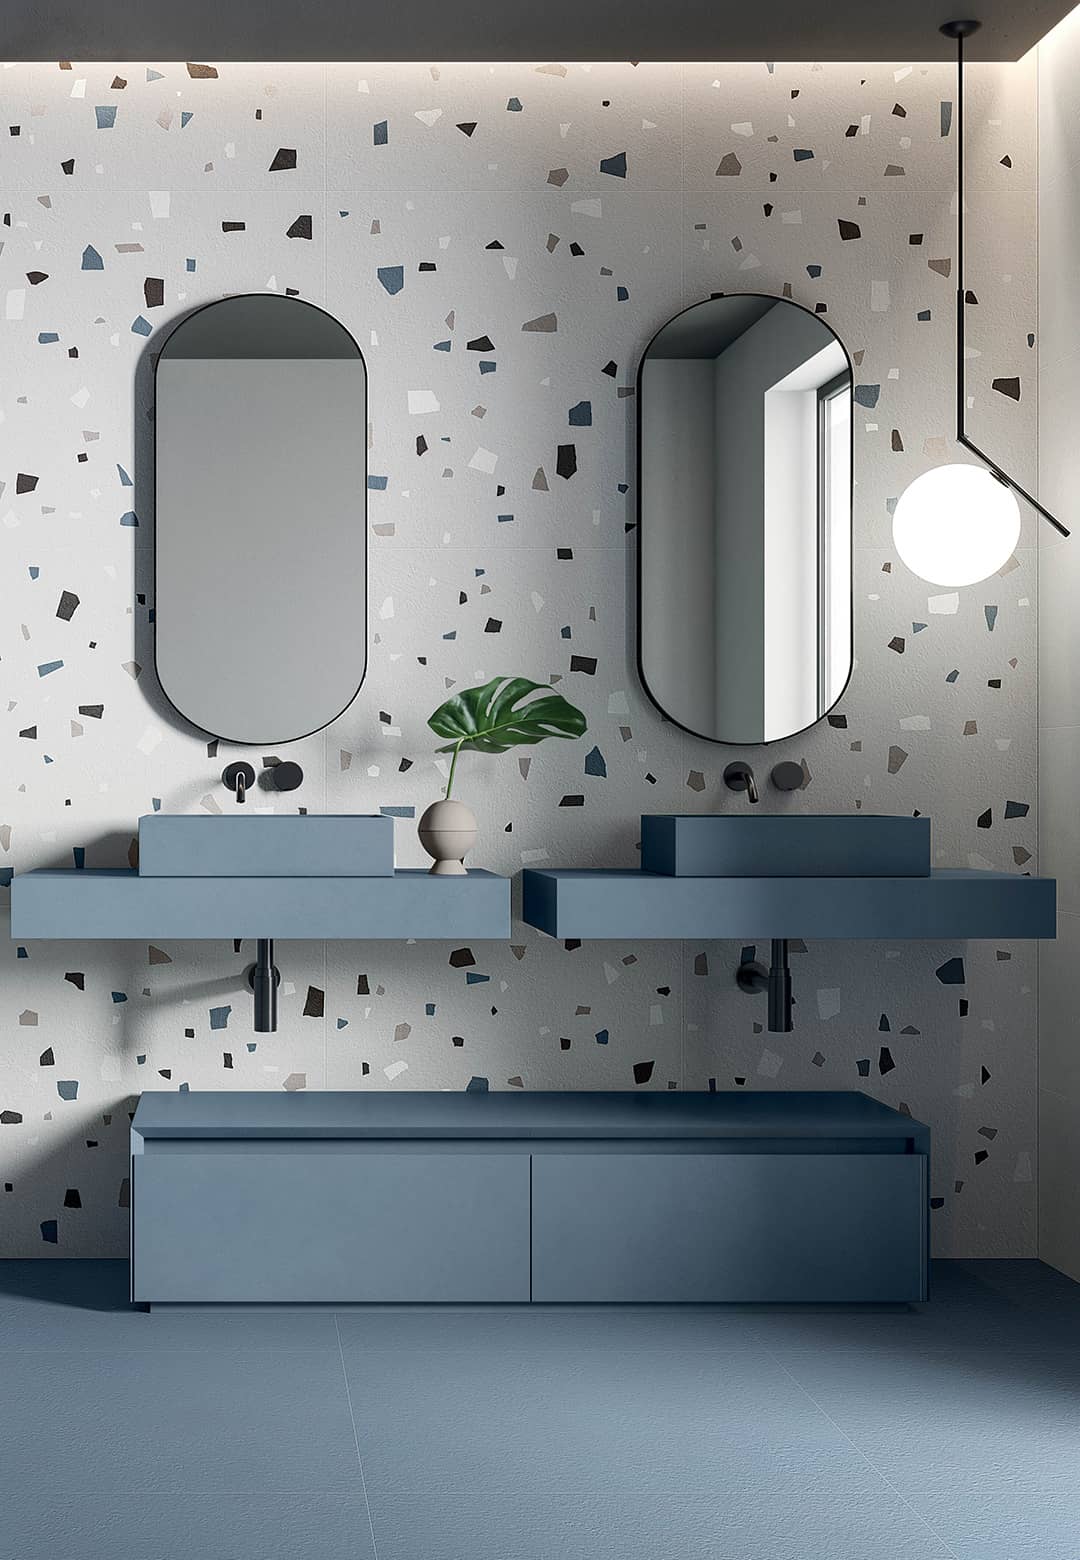 Italgraniti Group showcase their latest surface innovations at Cersaie